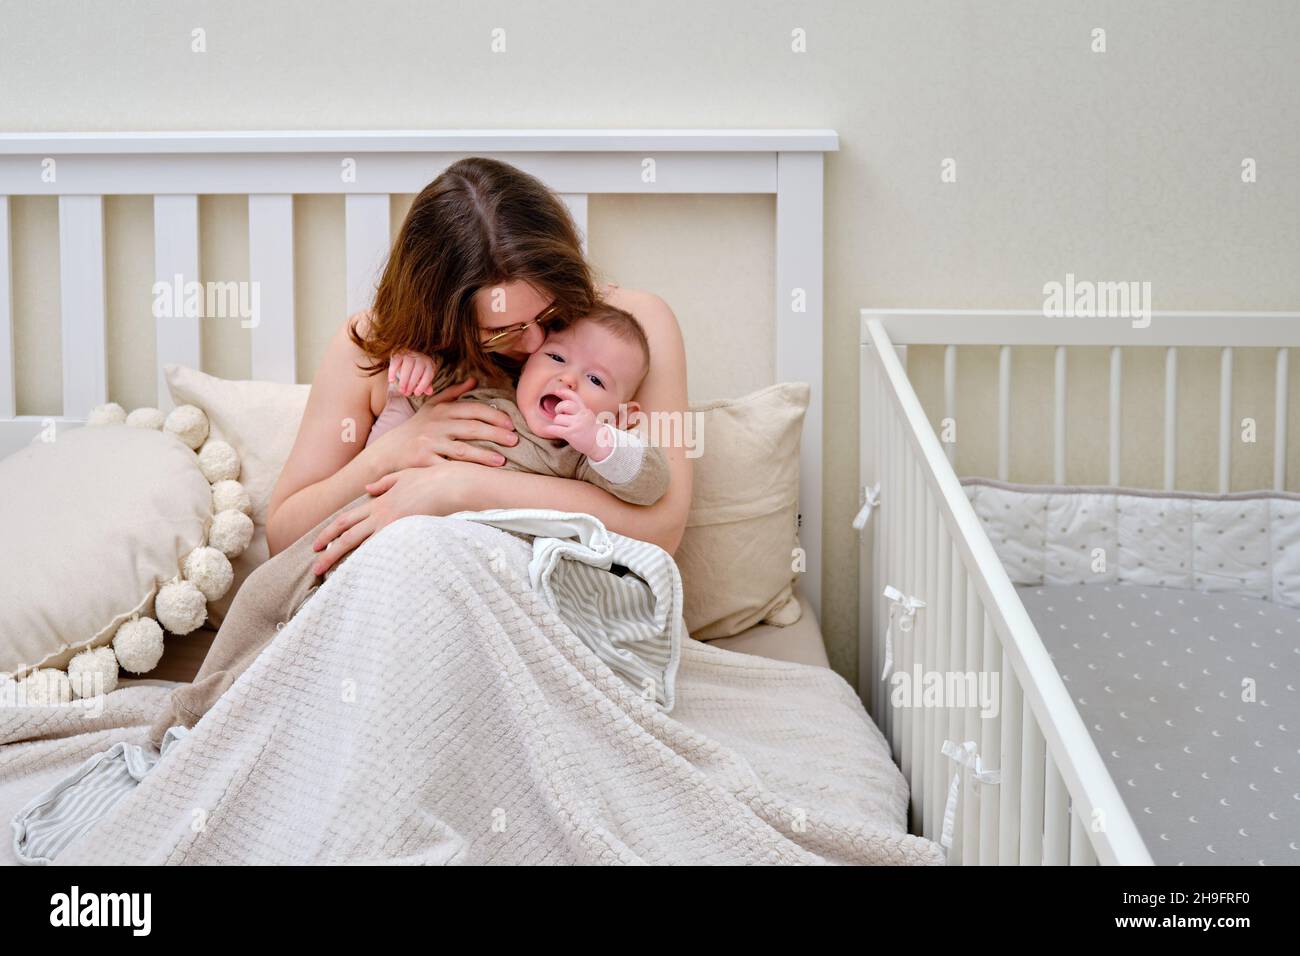 A mother woman kisses and comforts a crying infant baby boy sitting on the bed Stock Photo